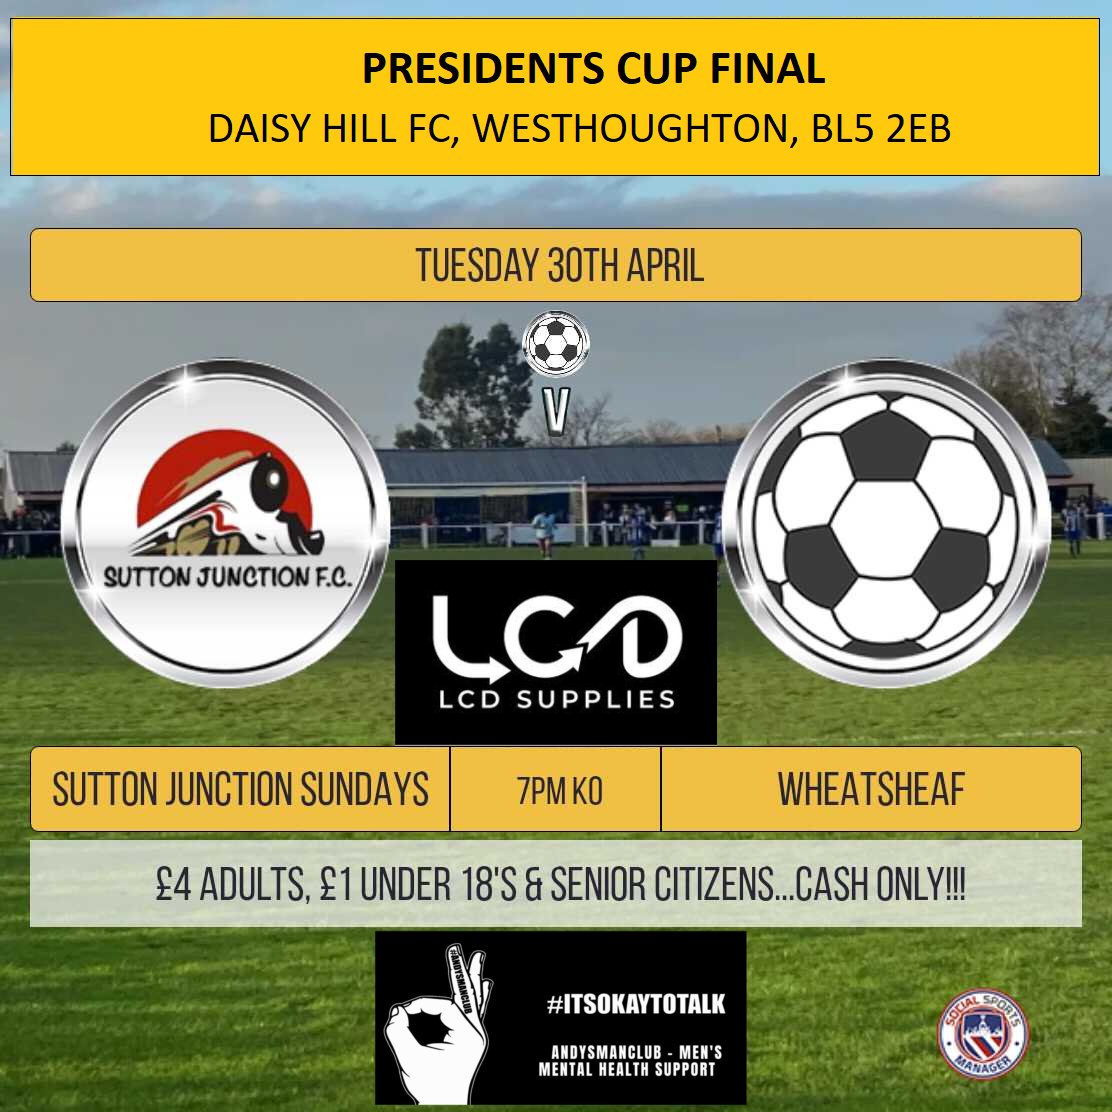 We're in the SLCFL Presidents Cup Final!! 🏆 And it's a local derby, against Wheatsheaf FC (previously Windle) ⚽️⚽️⚽️ Looking forward to this!! ❤️💛